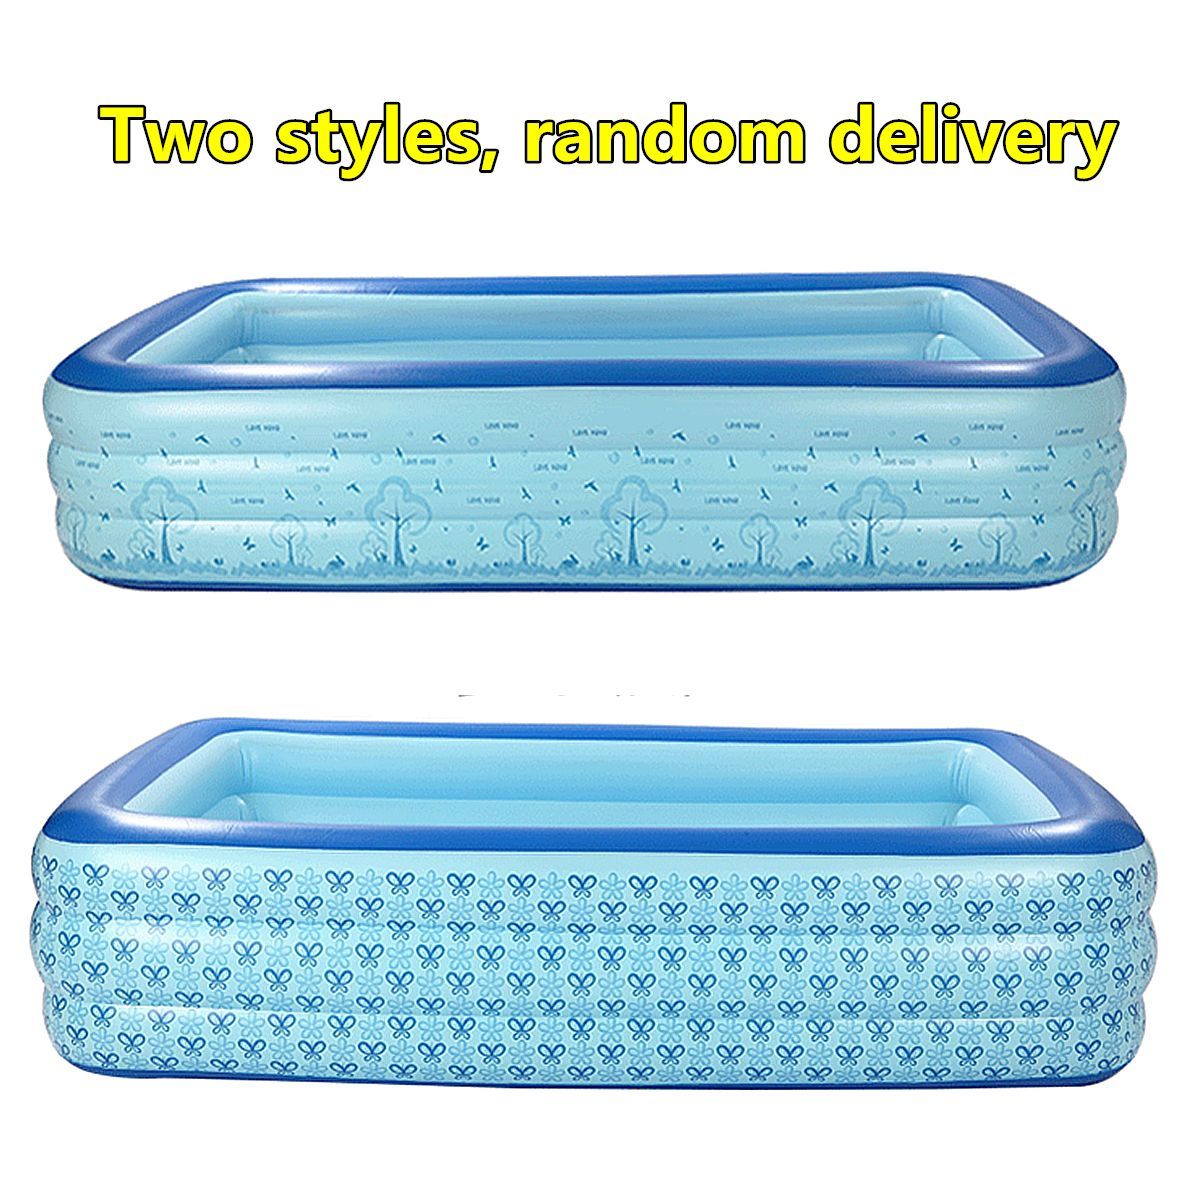 118-Inflatable-Swimming-Pool-Kids-Children-Adult-Family-Outdoor-Water-Play-1685017